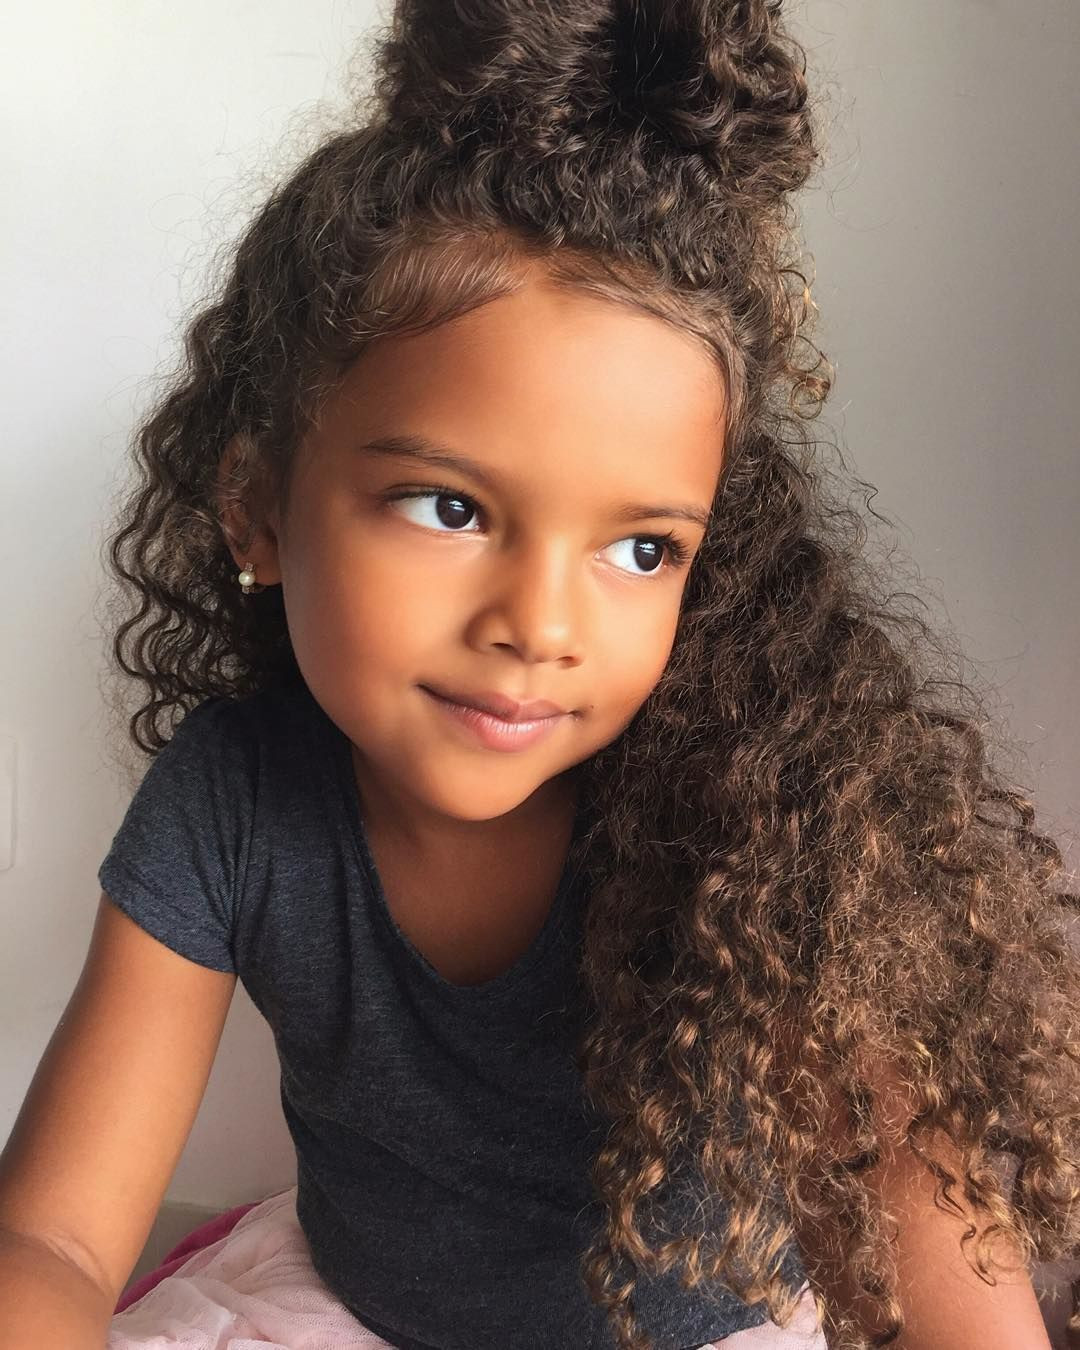 20 Of the Best Ideas for Mixed Kids Haircuts - Best Collections Ever